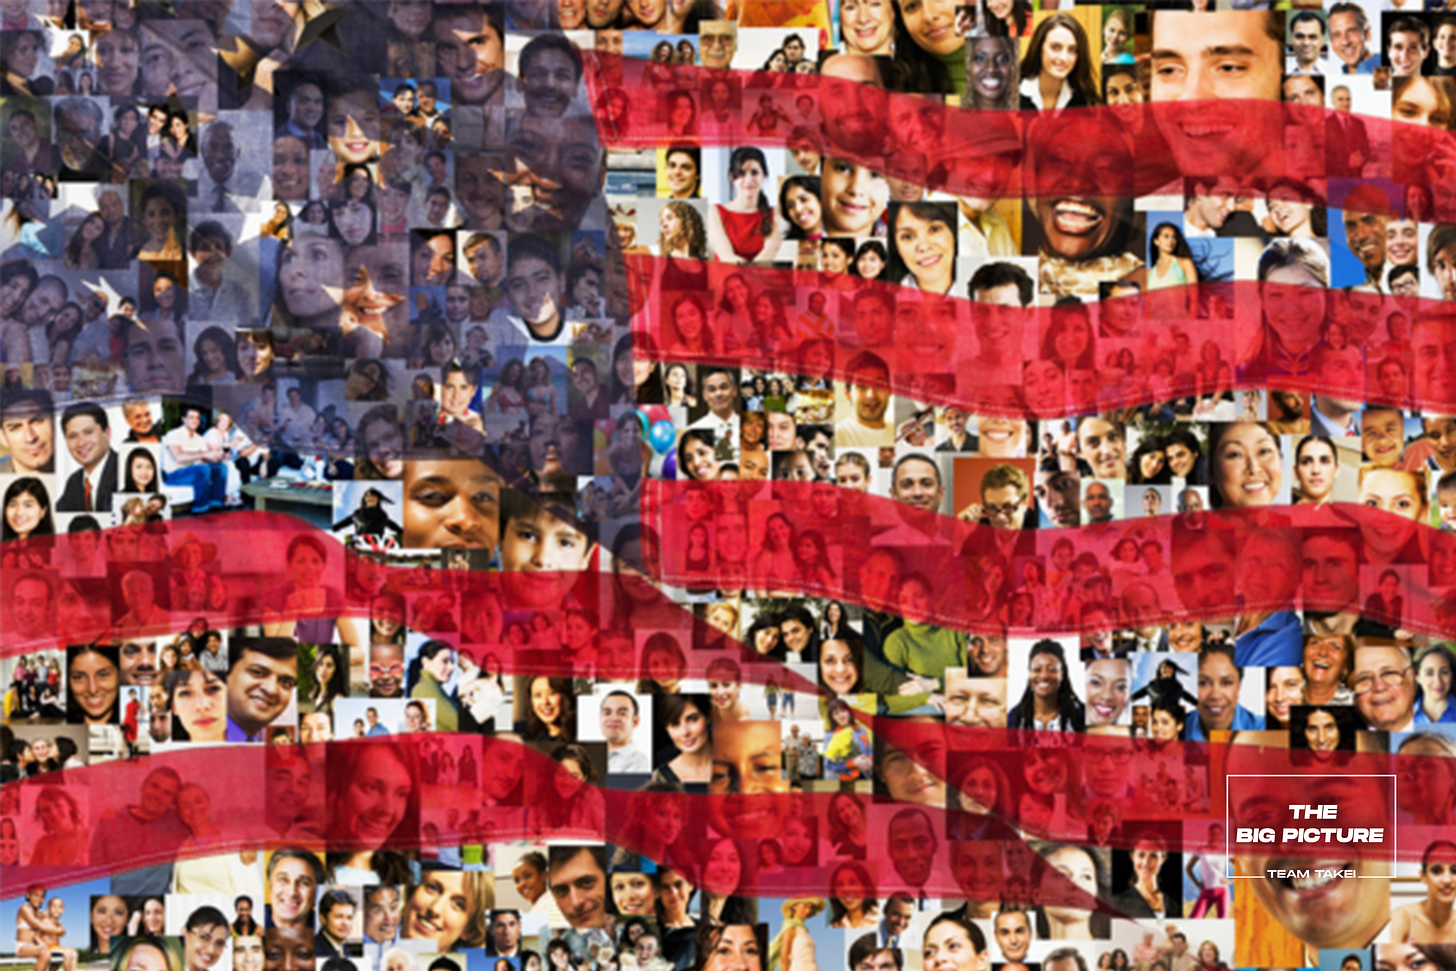 American flag over collage of diverse people.